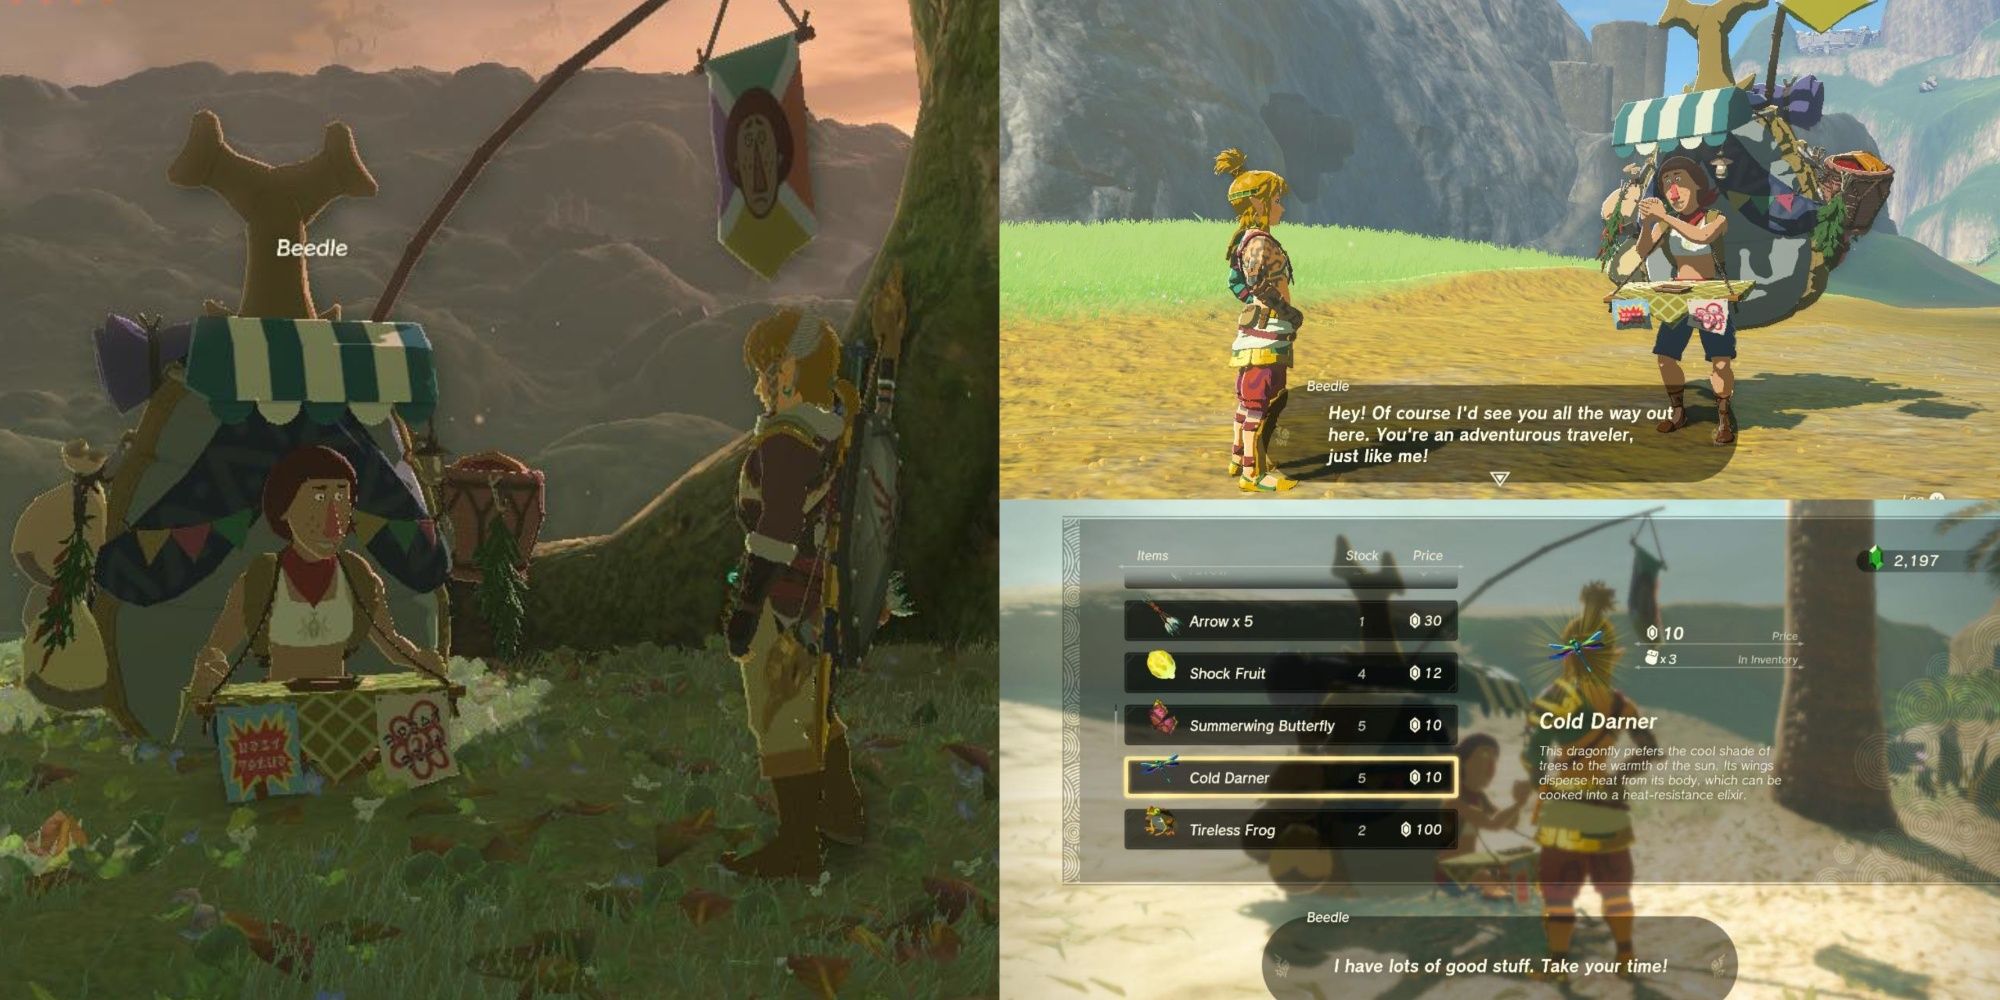 Beedle from Tears of the Kingdom Beedle in various locations with Link